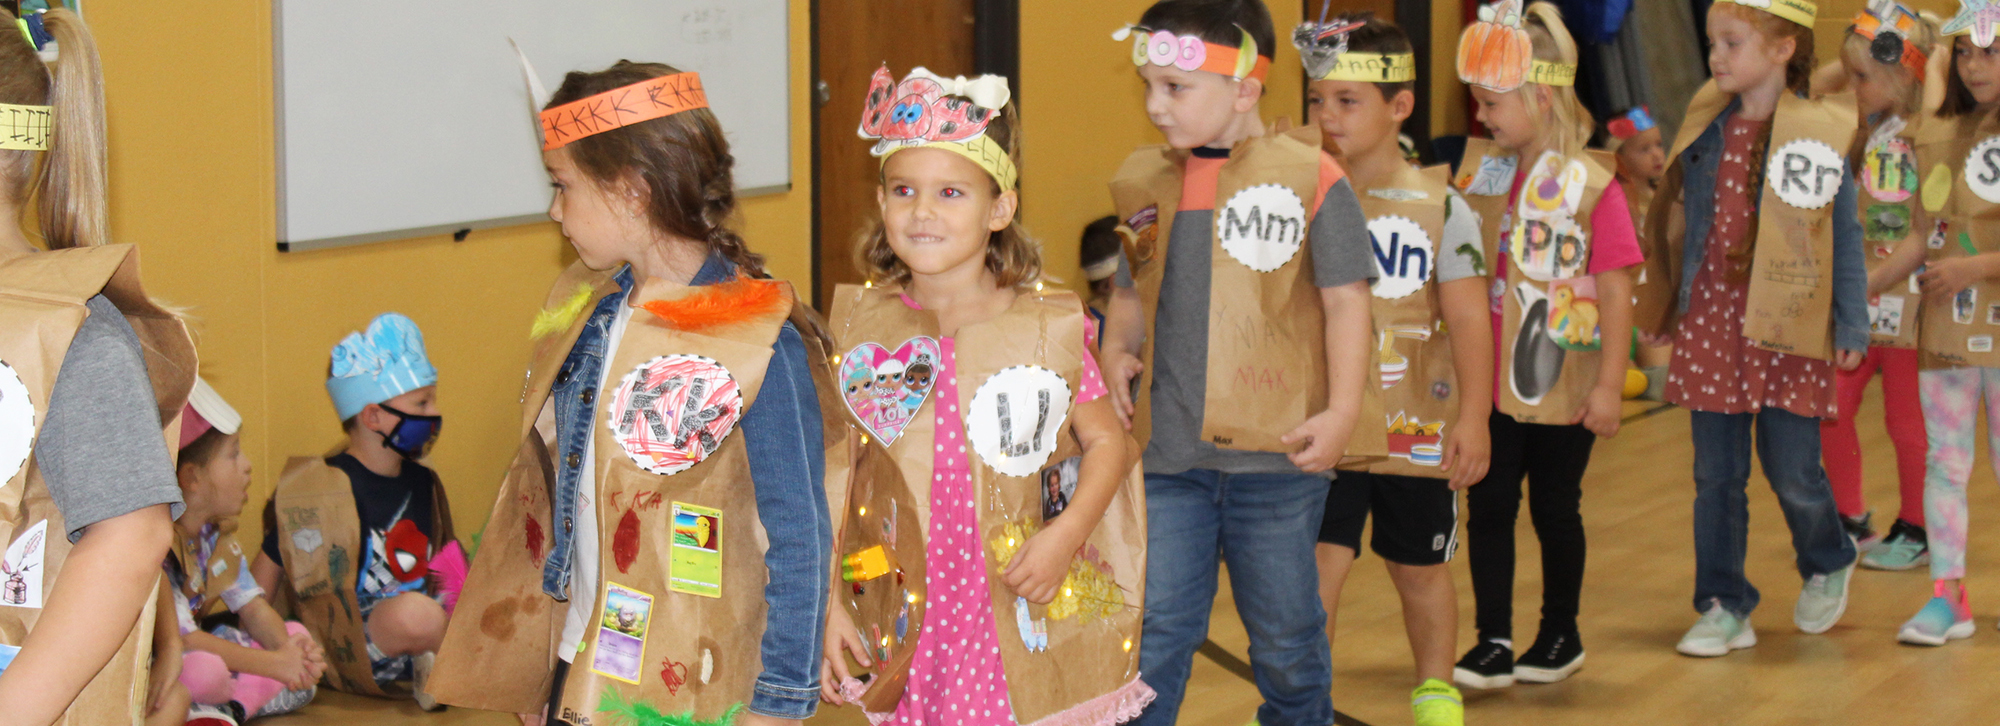 kindergarten students in the ABC outfits